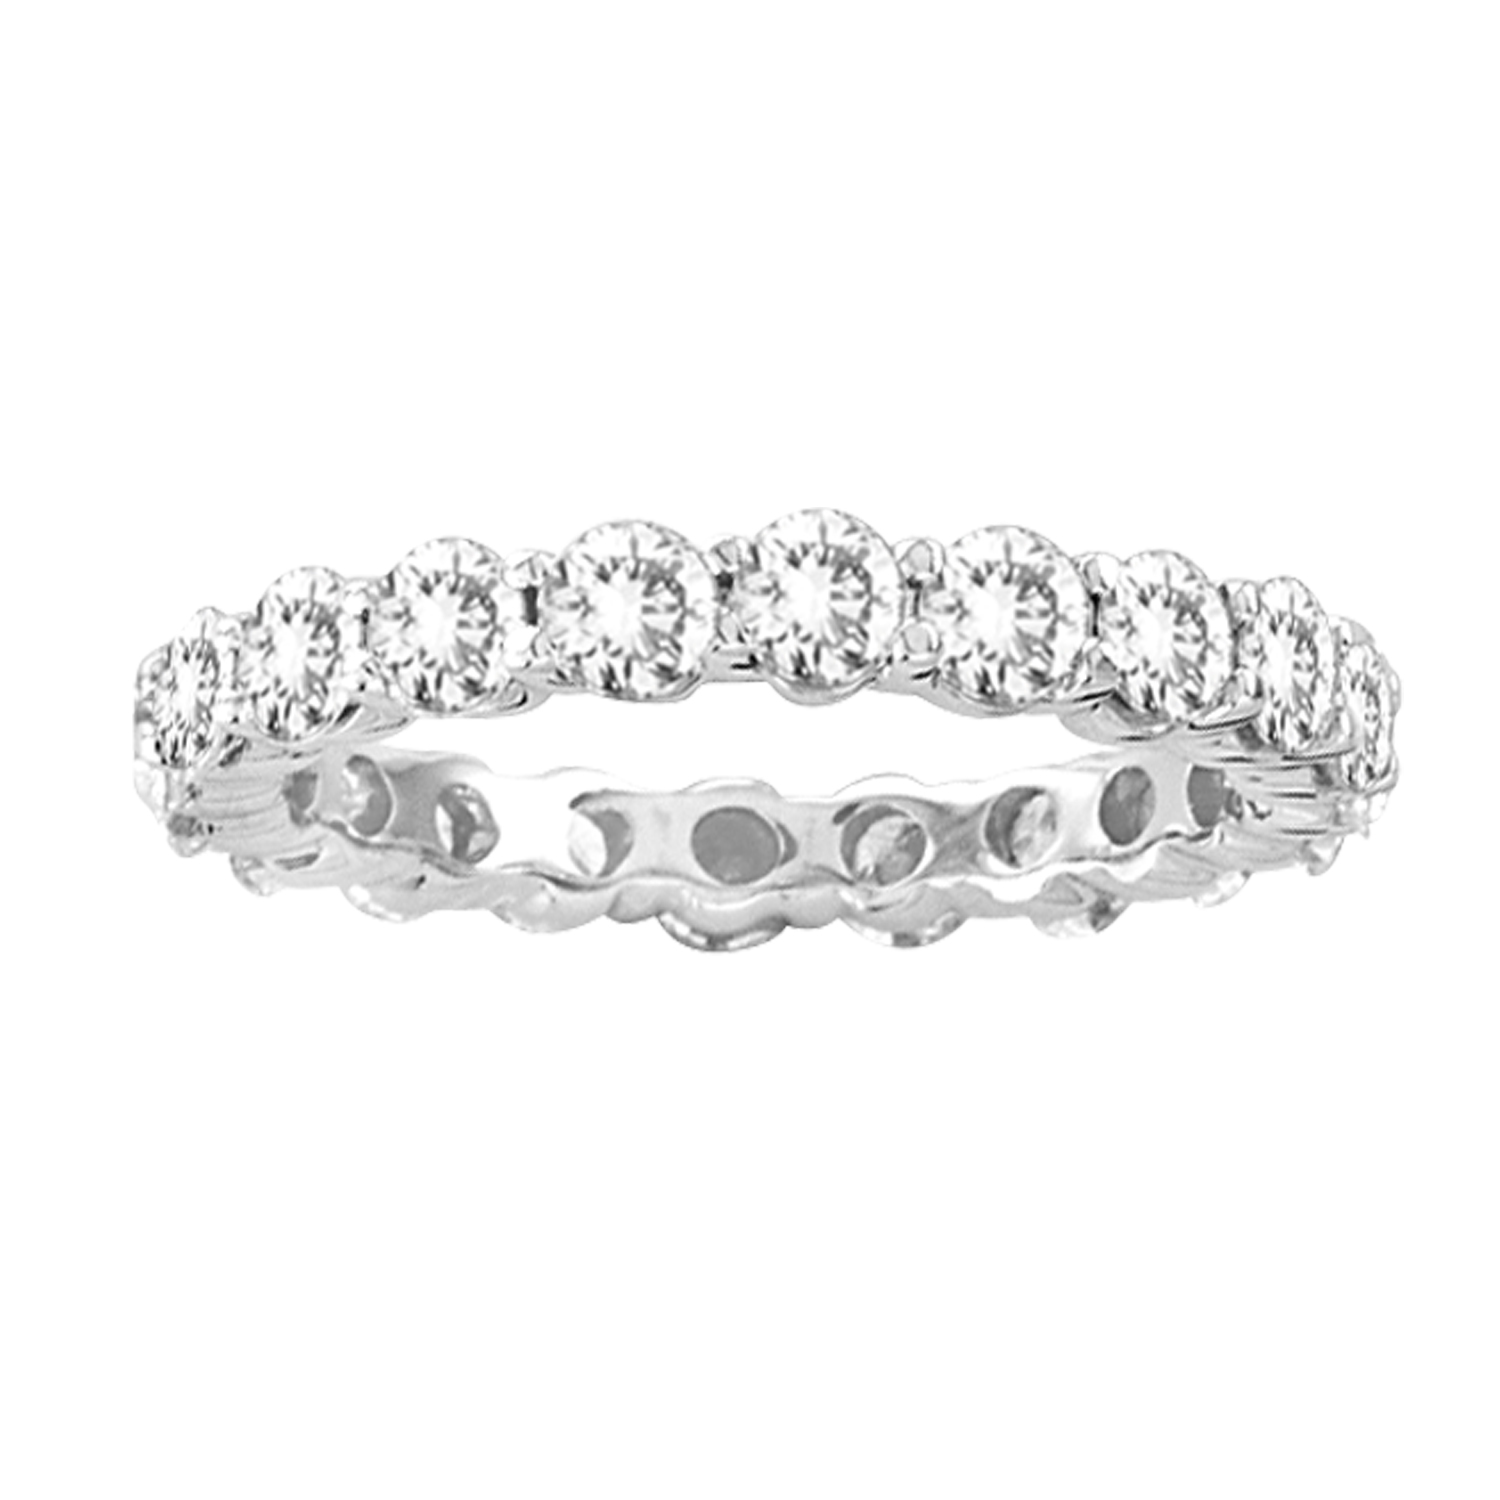 View 3.00cttw. Shared Prong All Around Diamond Eternity Band 14k Gold Bridal Ring HI-SI (R)